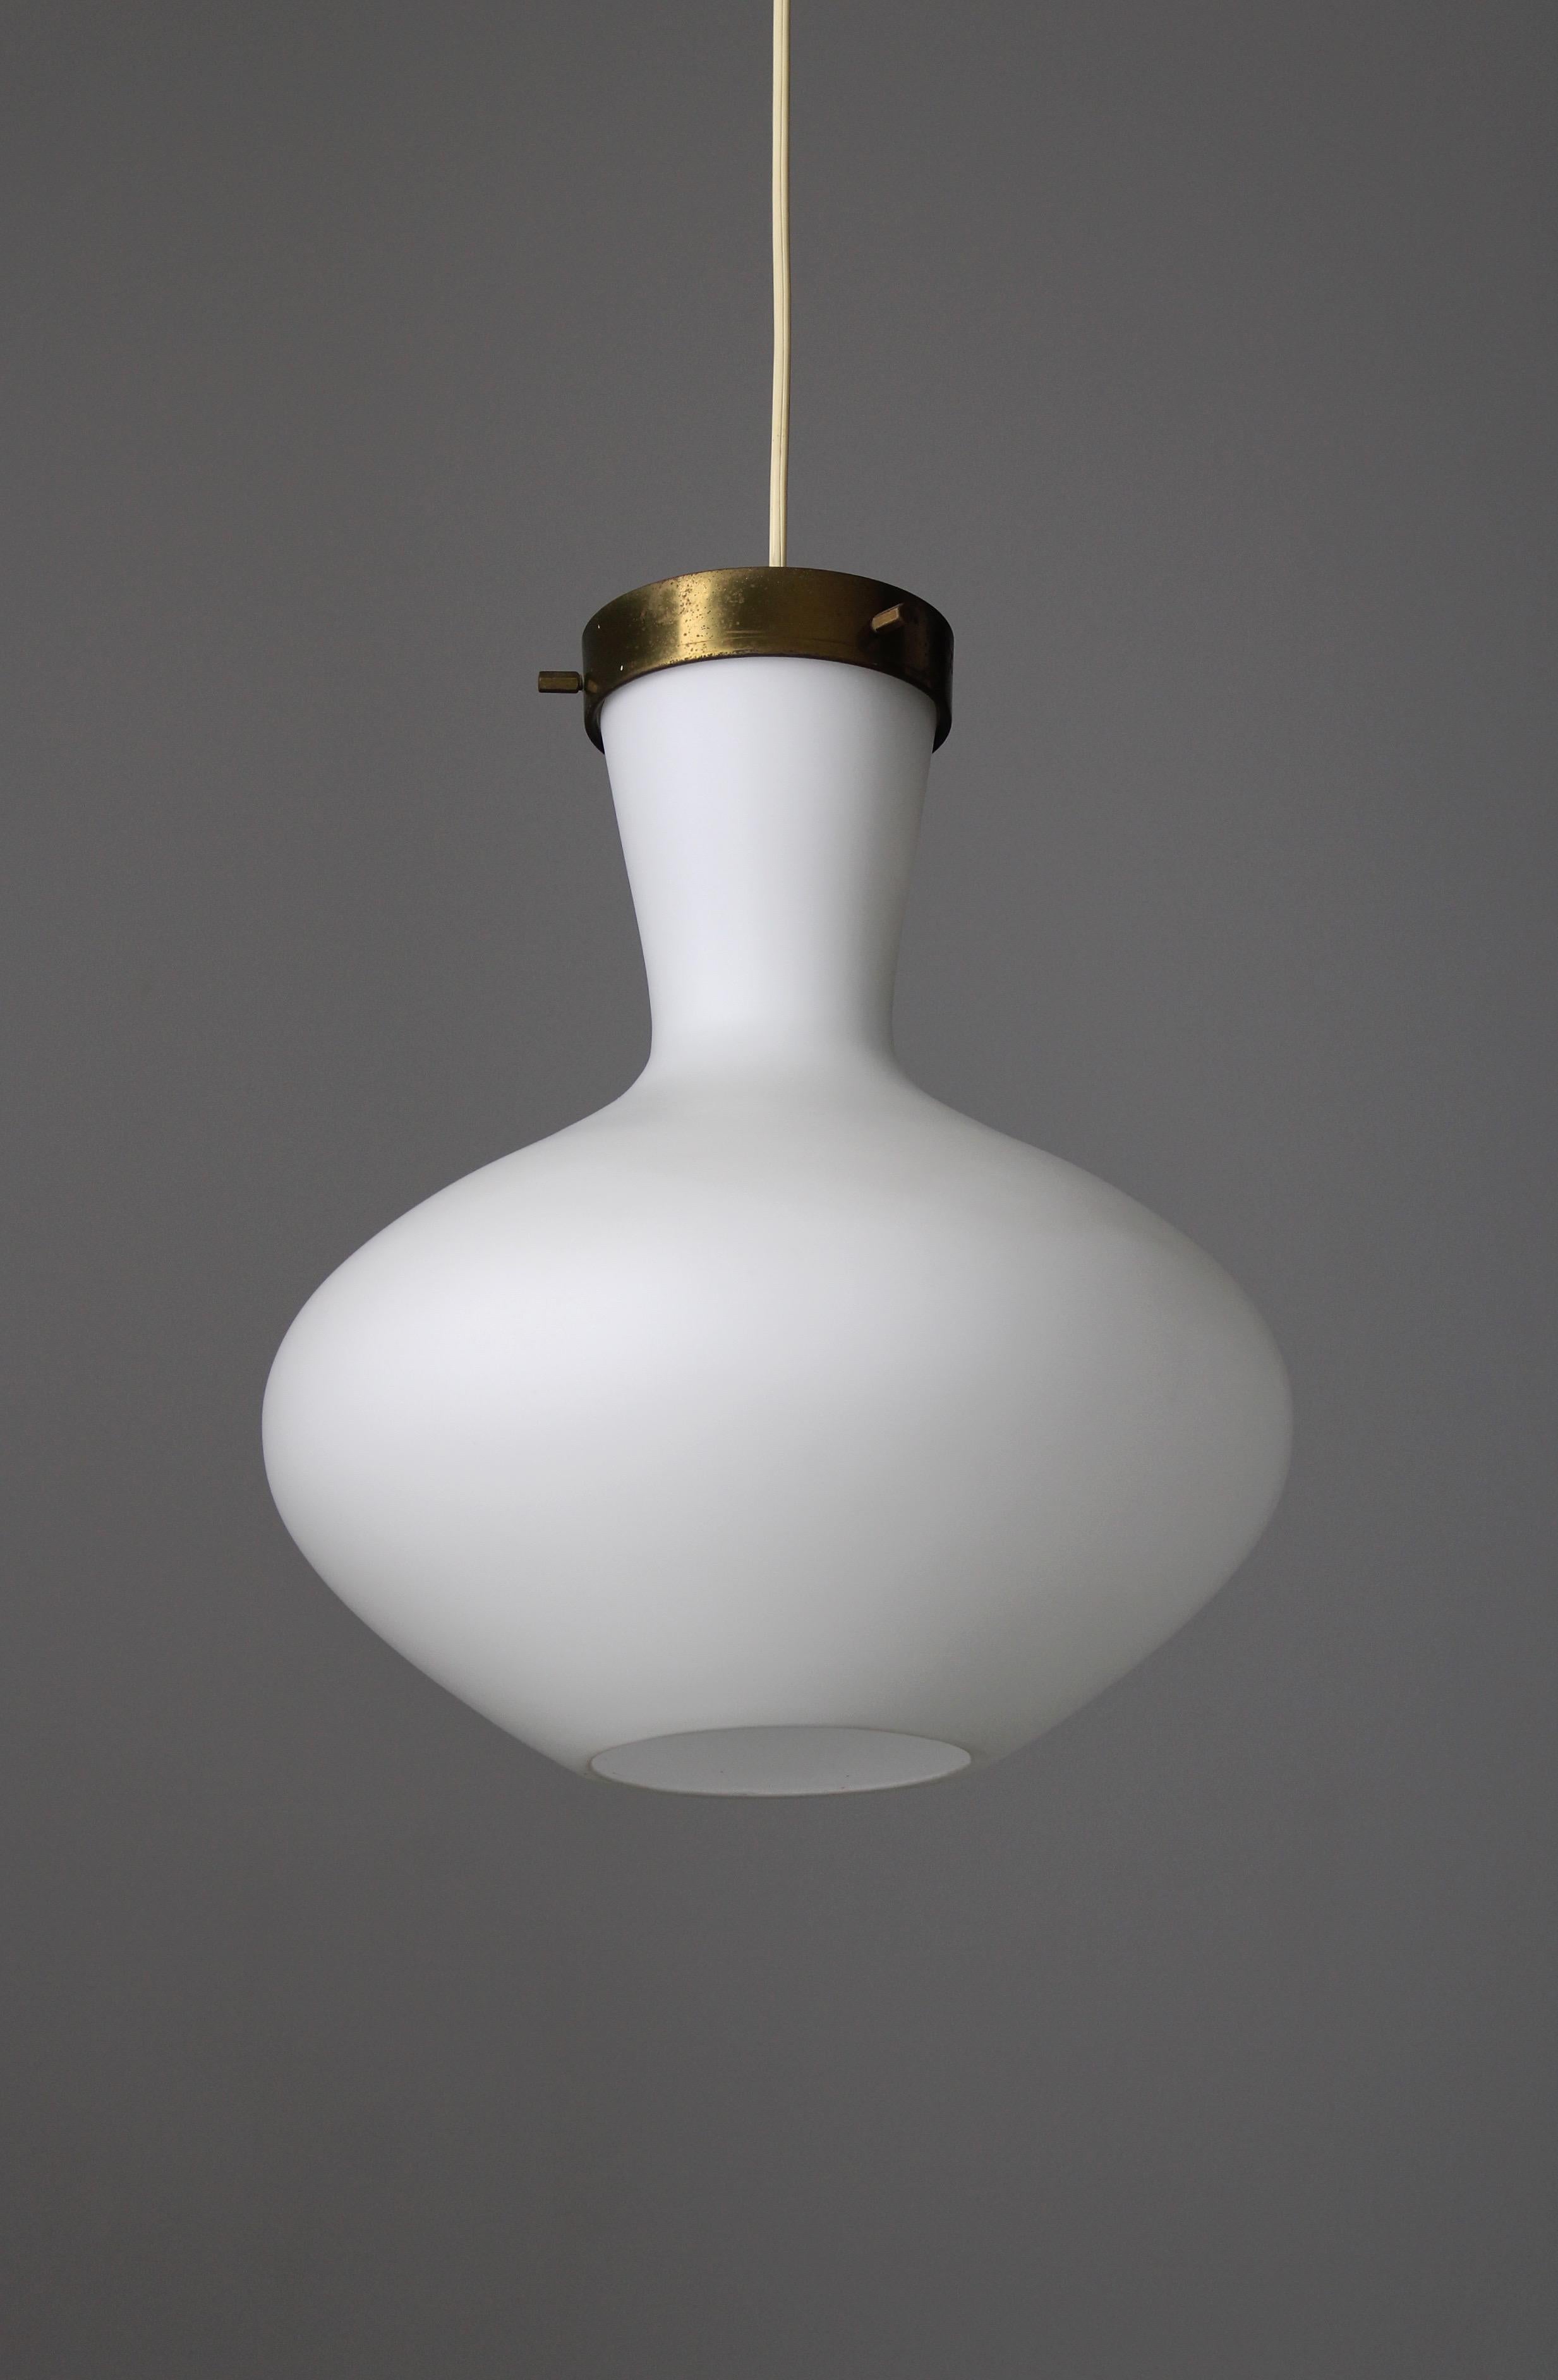 Organic shaped ceiling lamp made of white satin glass and brass. Produced by Stilnovo in Milan near the end of the 1950s. Very fine condition with minor wear. Equipped with the original ceramic E27 socket, brass armature and ceiling cap. On the